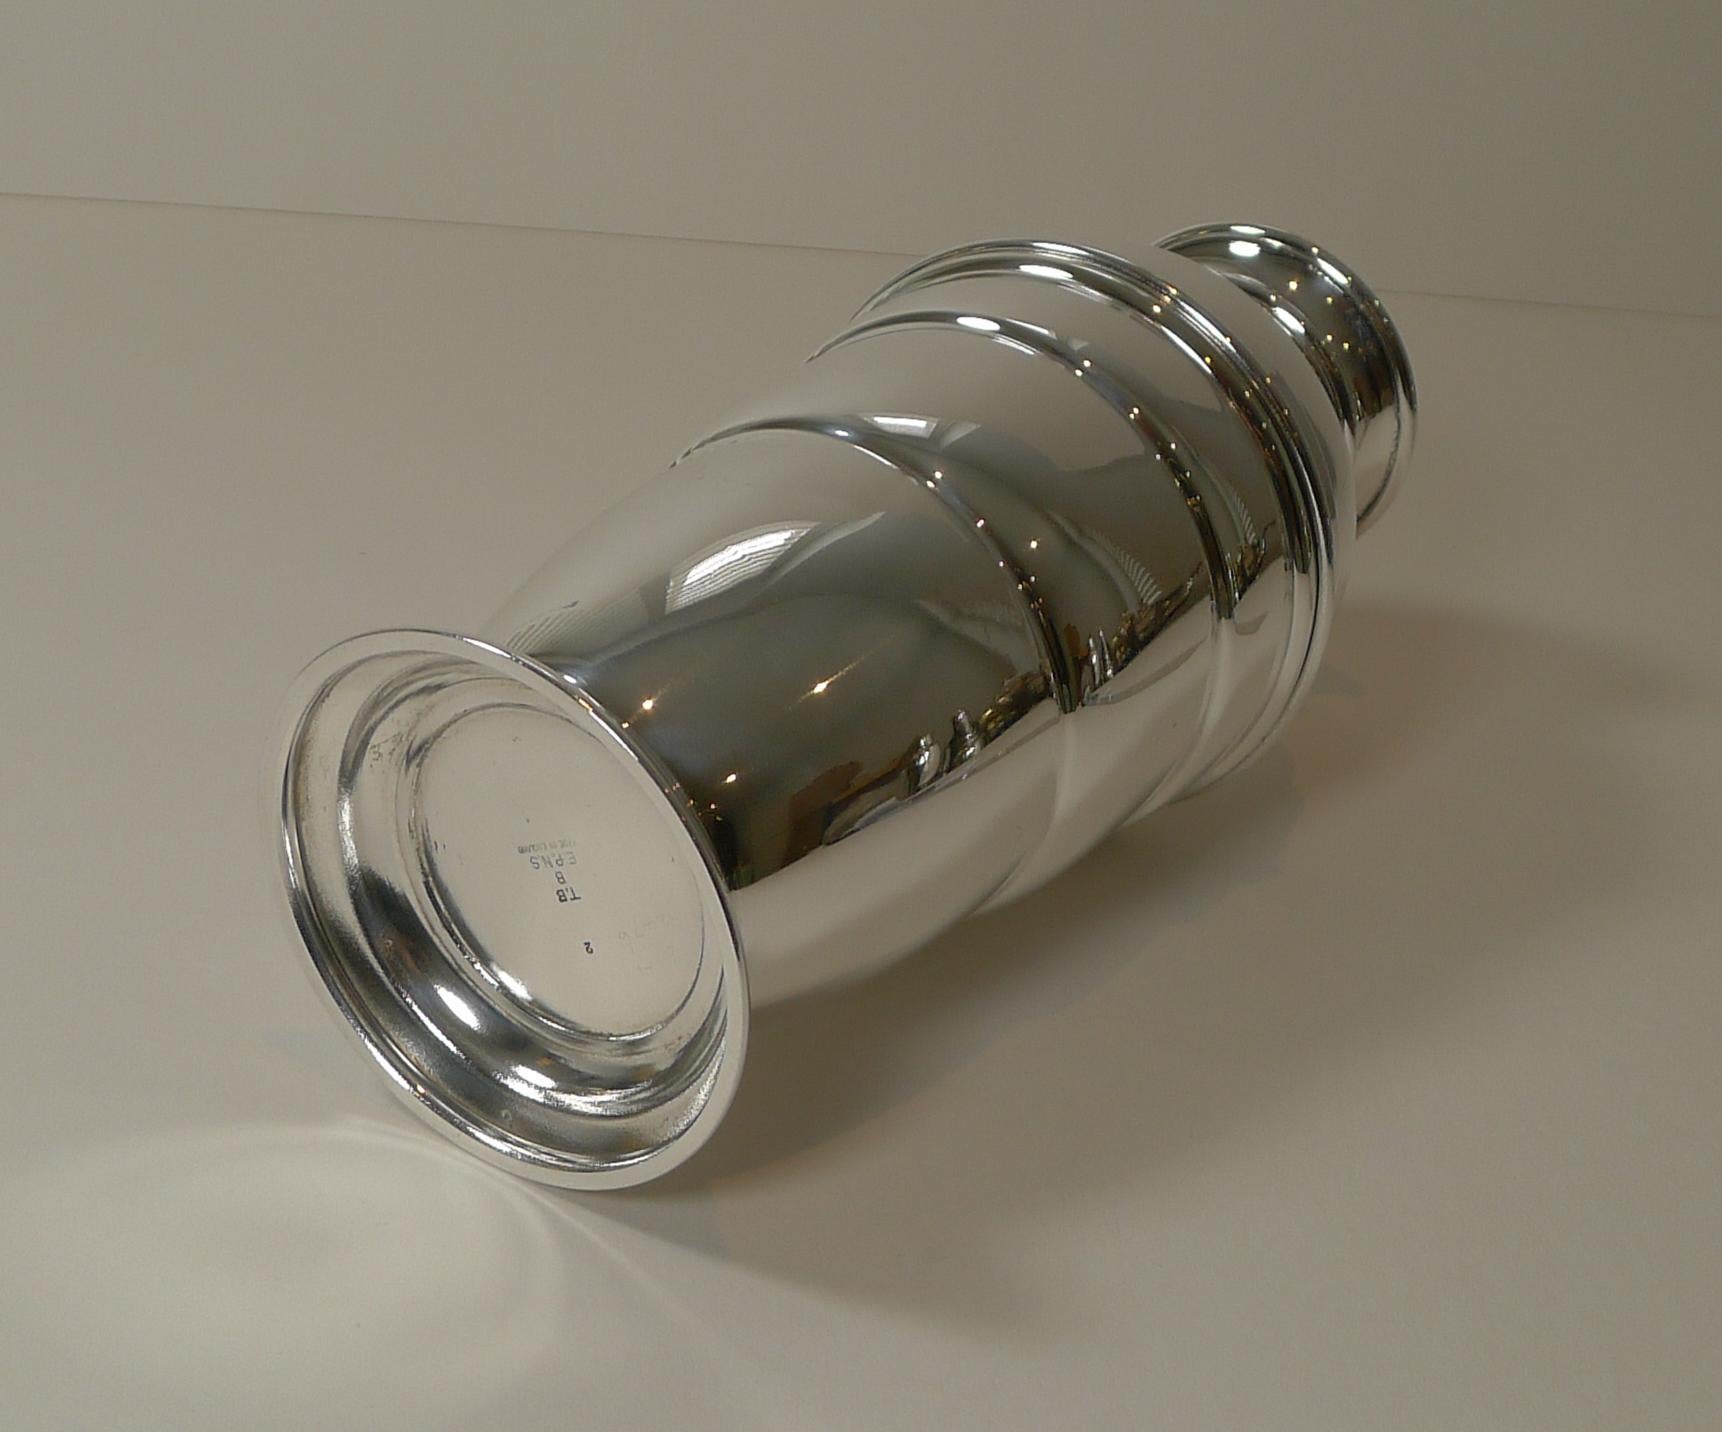 English Art Deco Cocktail Shaker c.1930, Silver Plate 1